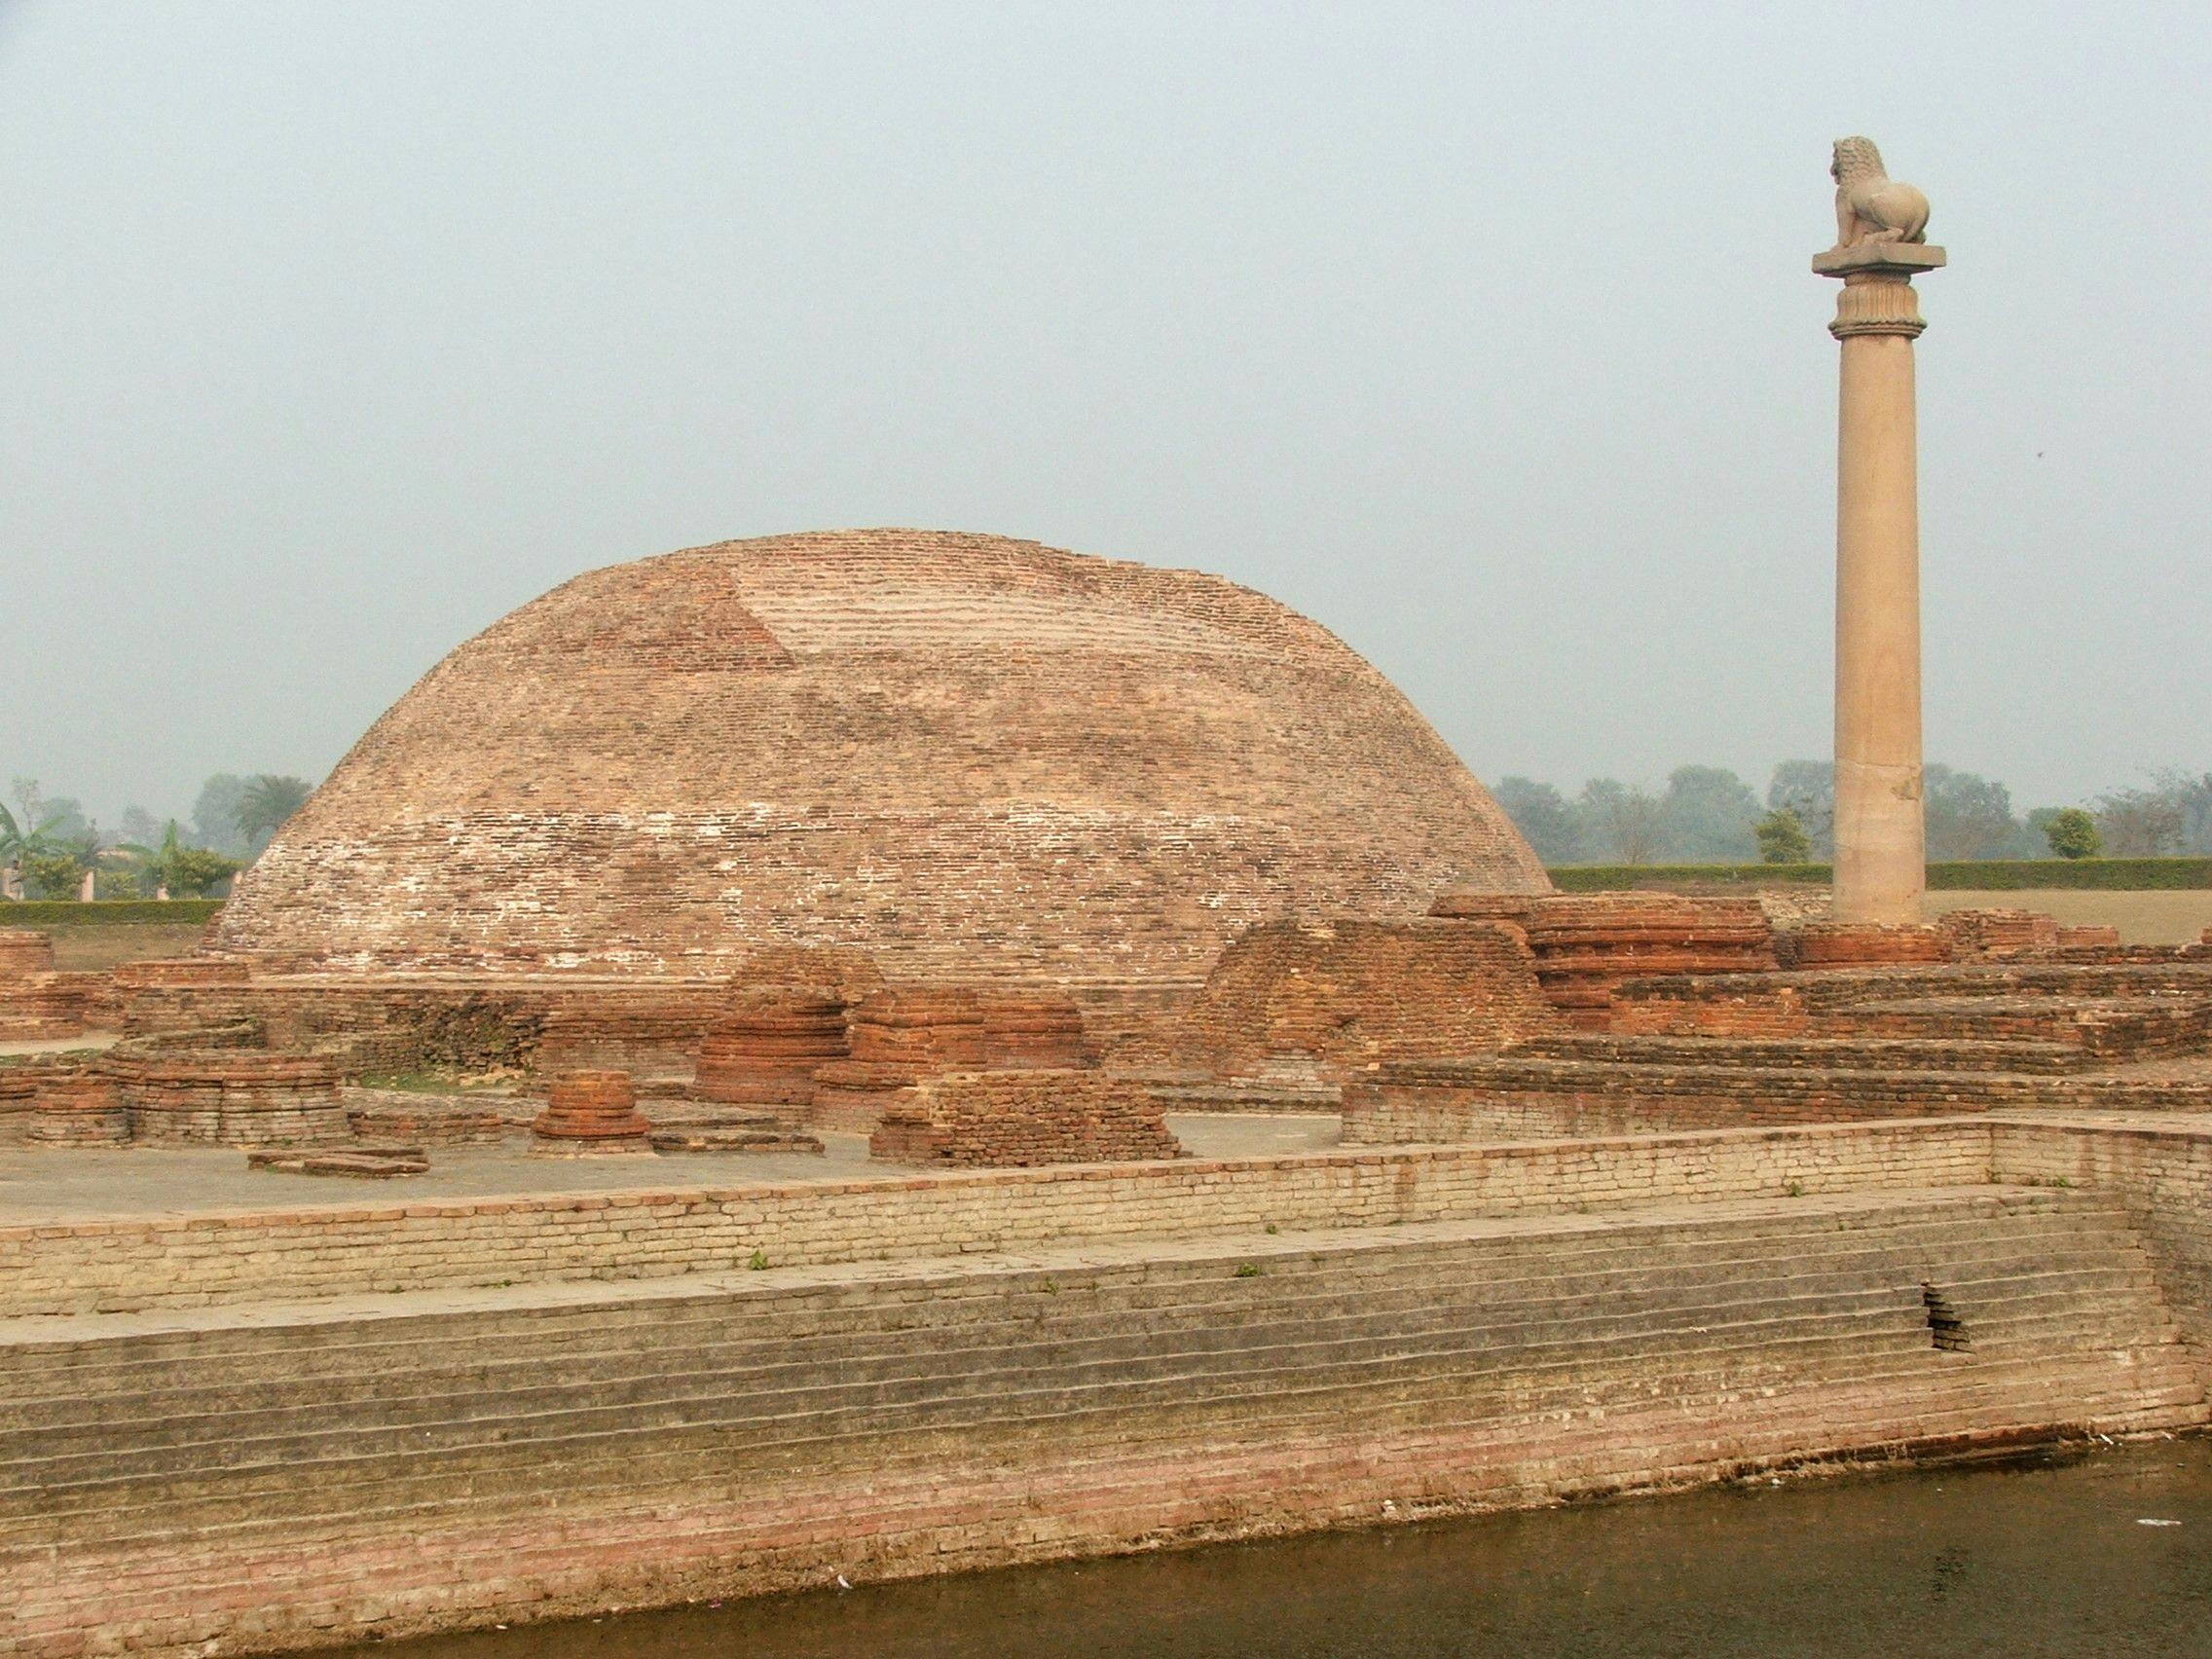 Ananda Stupa, built by the Licchavis at Vaishali, which served as the capital of Vajji